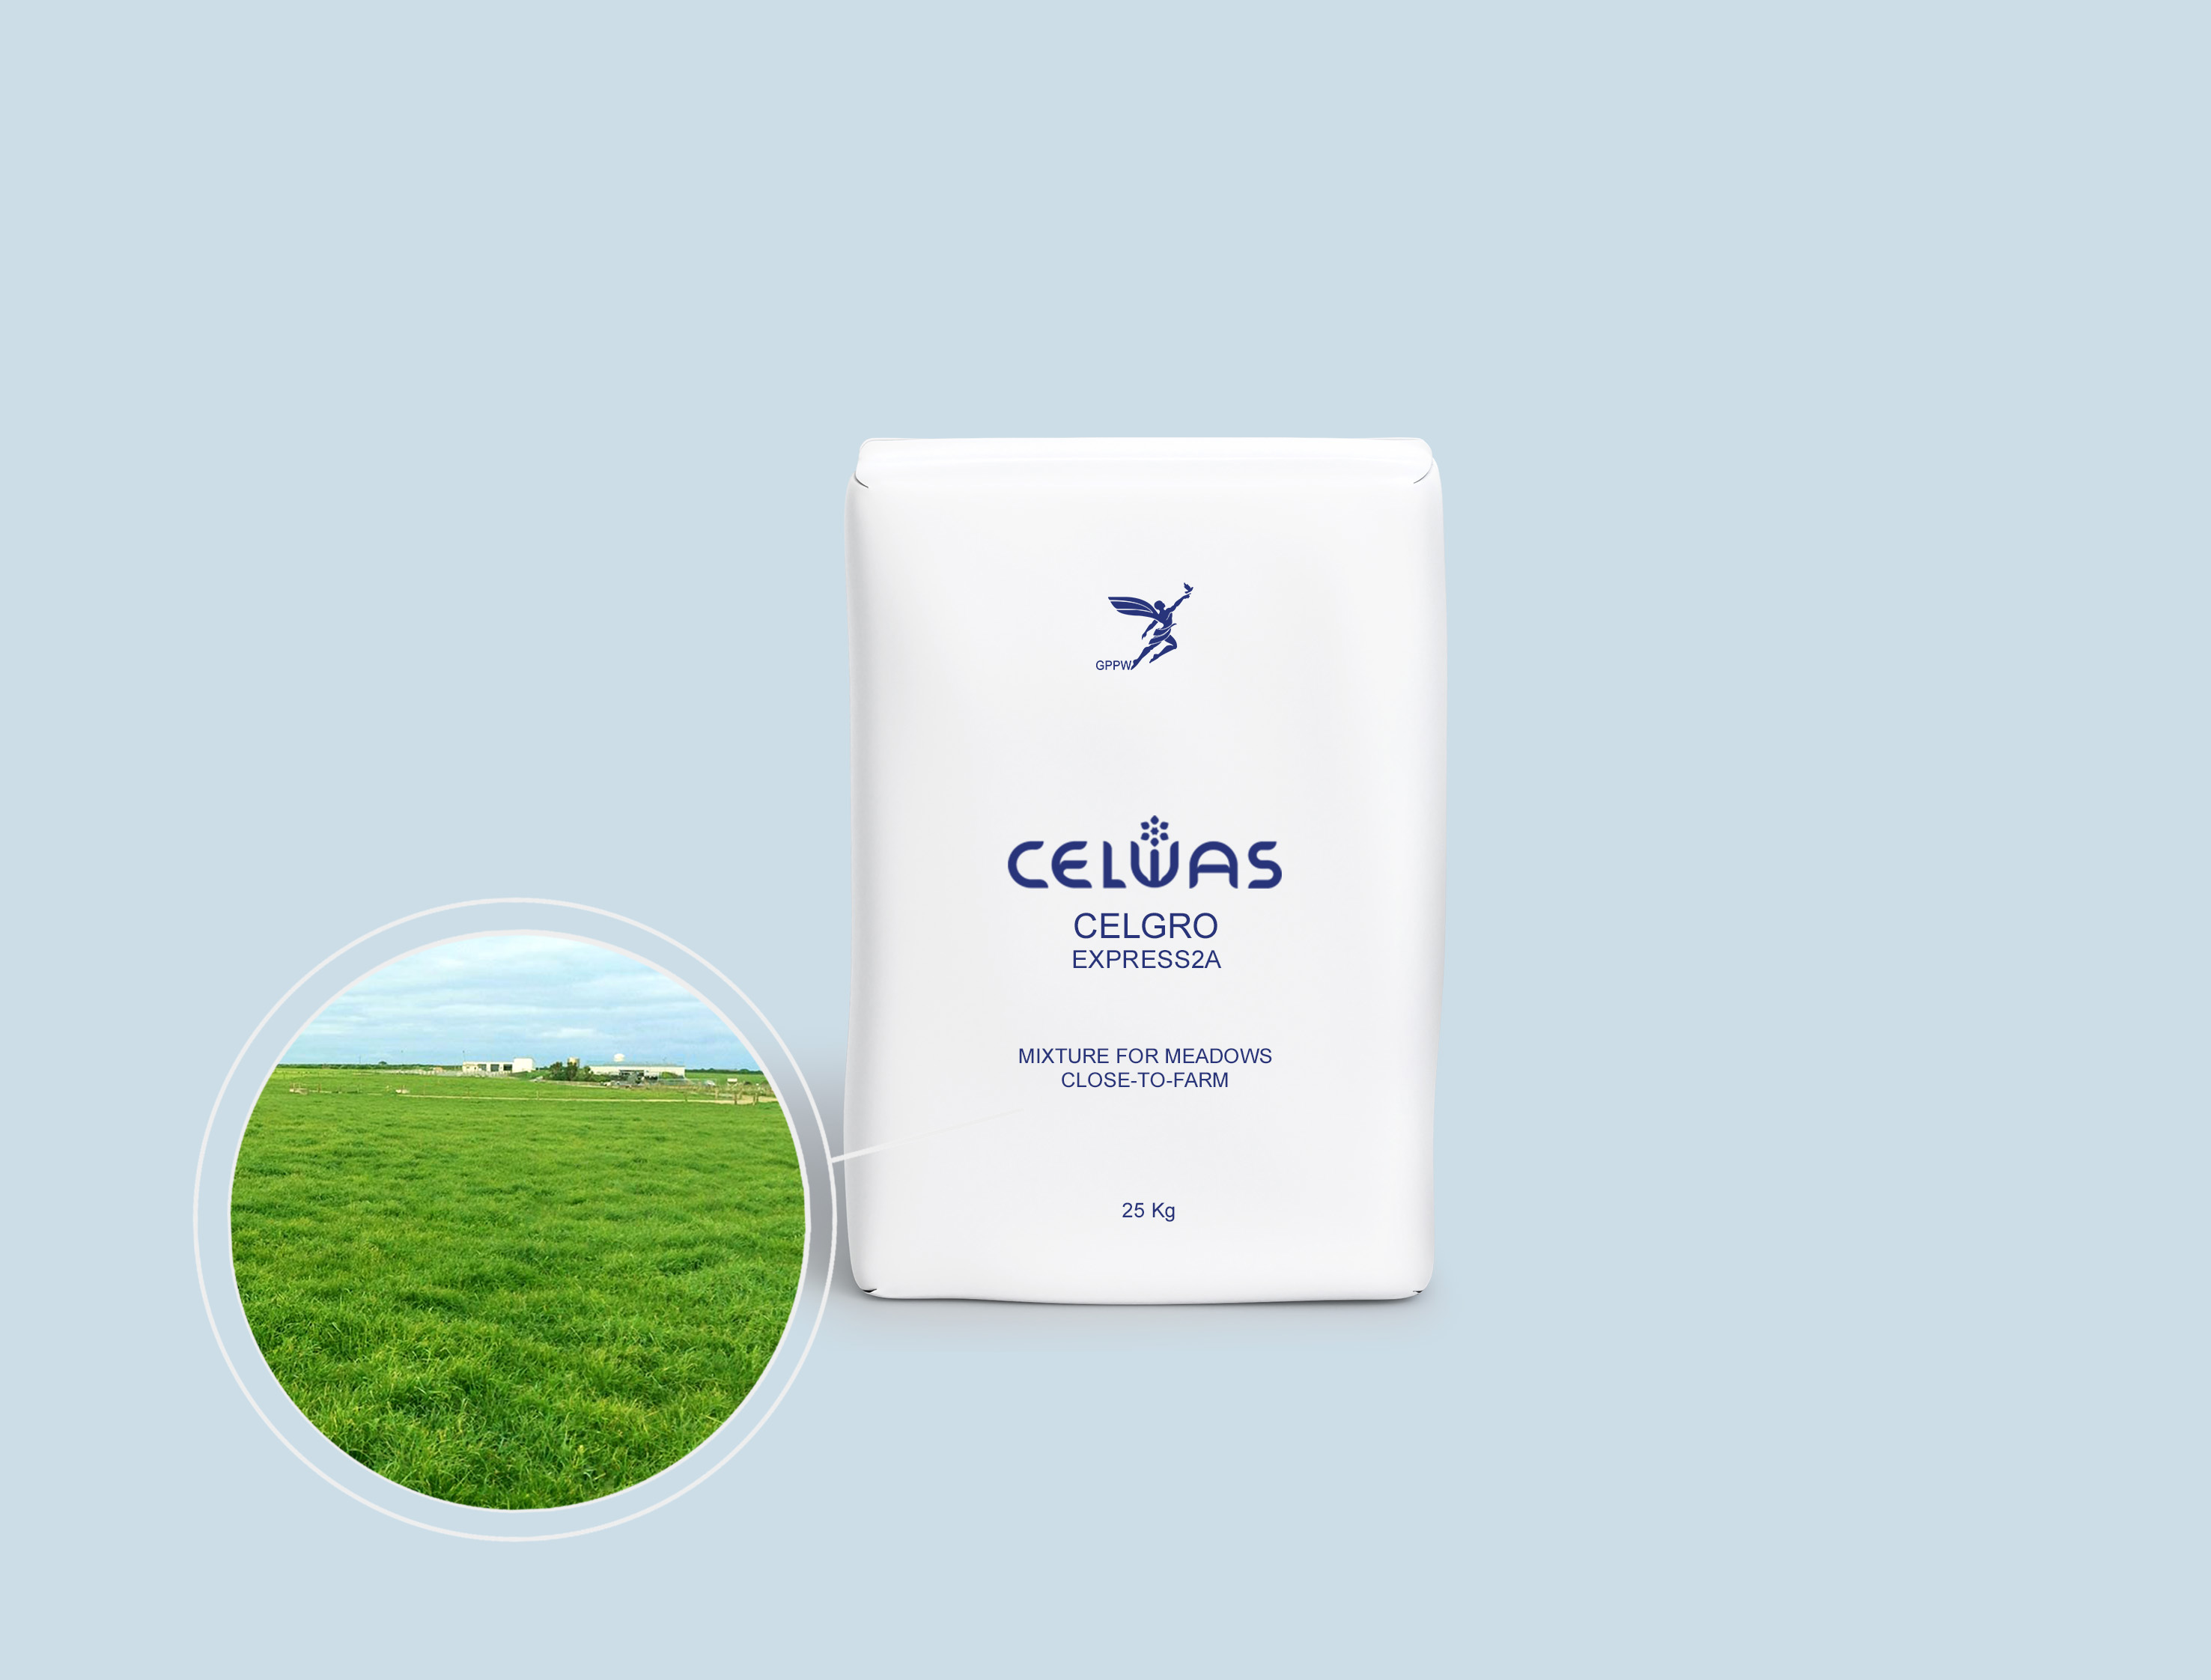 CELGRO EXPRESS2A<br/> fodder grasses and legumes